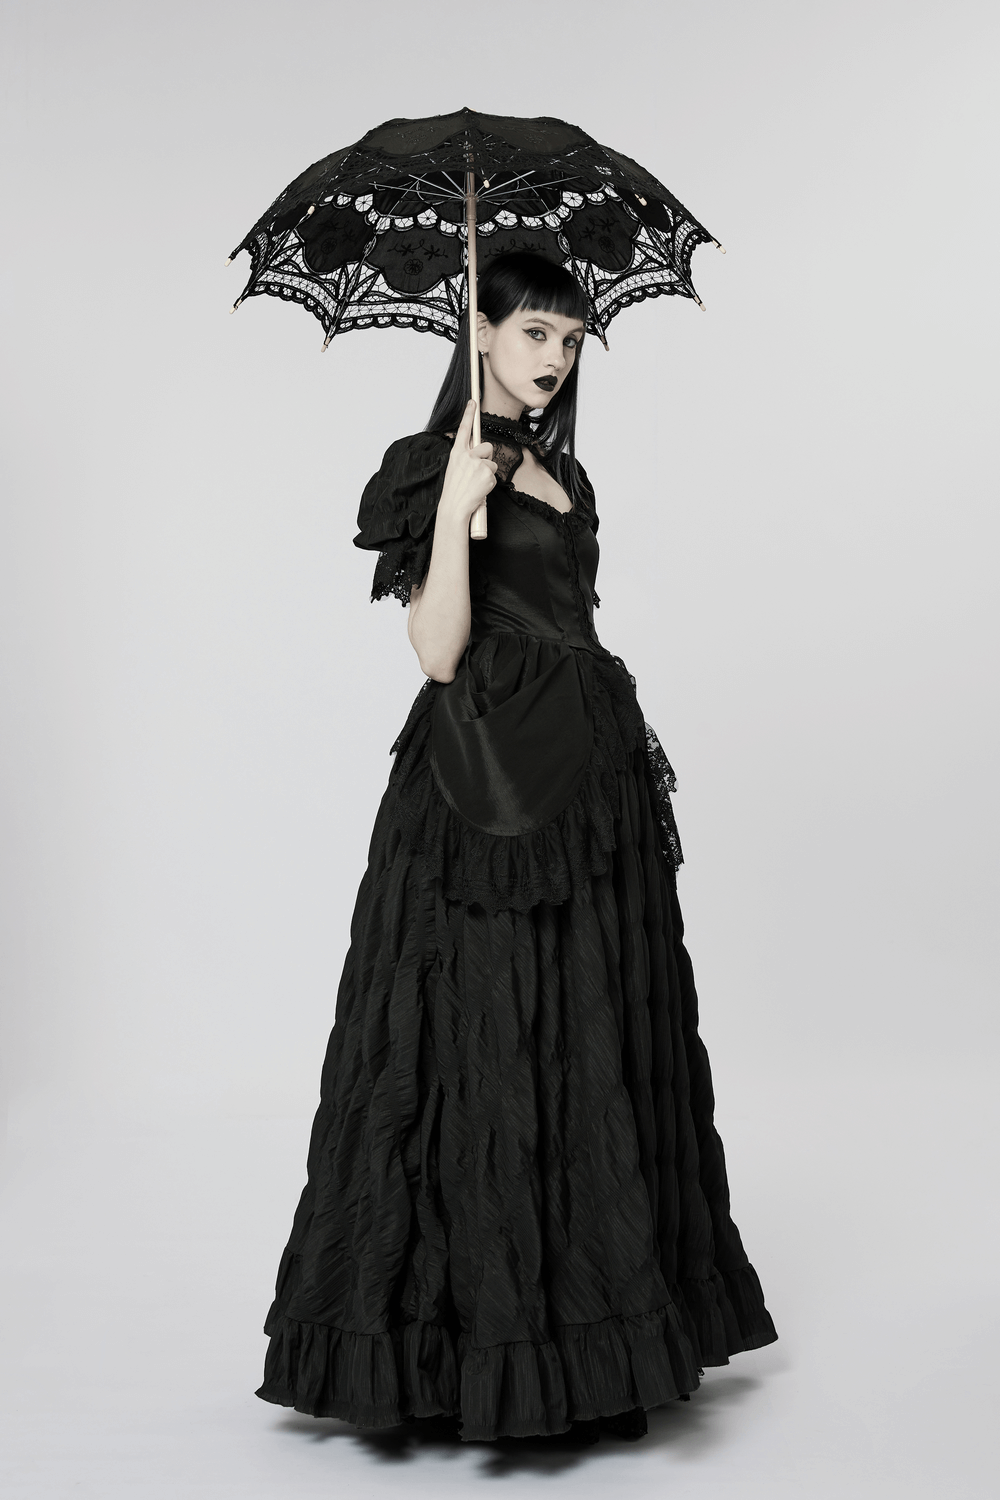 Elegant Victorian Gothic Lace Ruffles Evening Gown